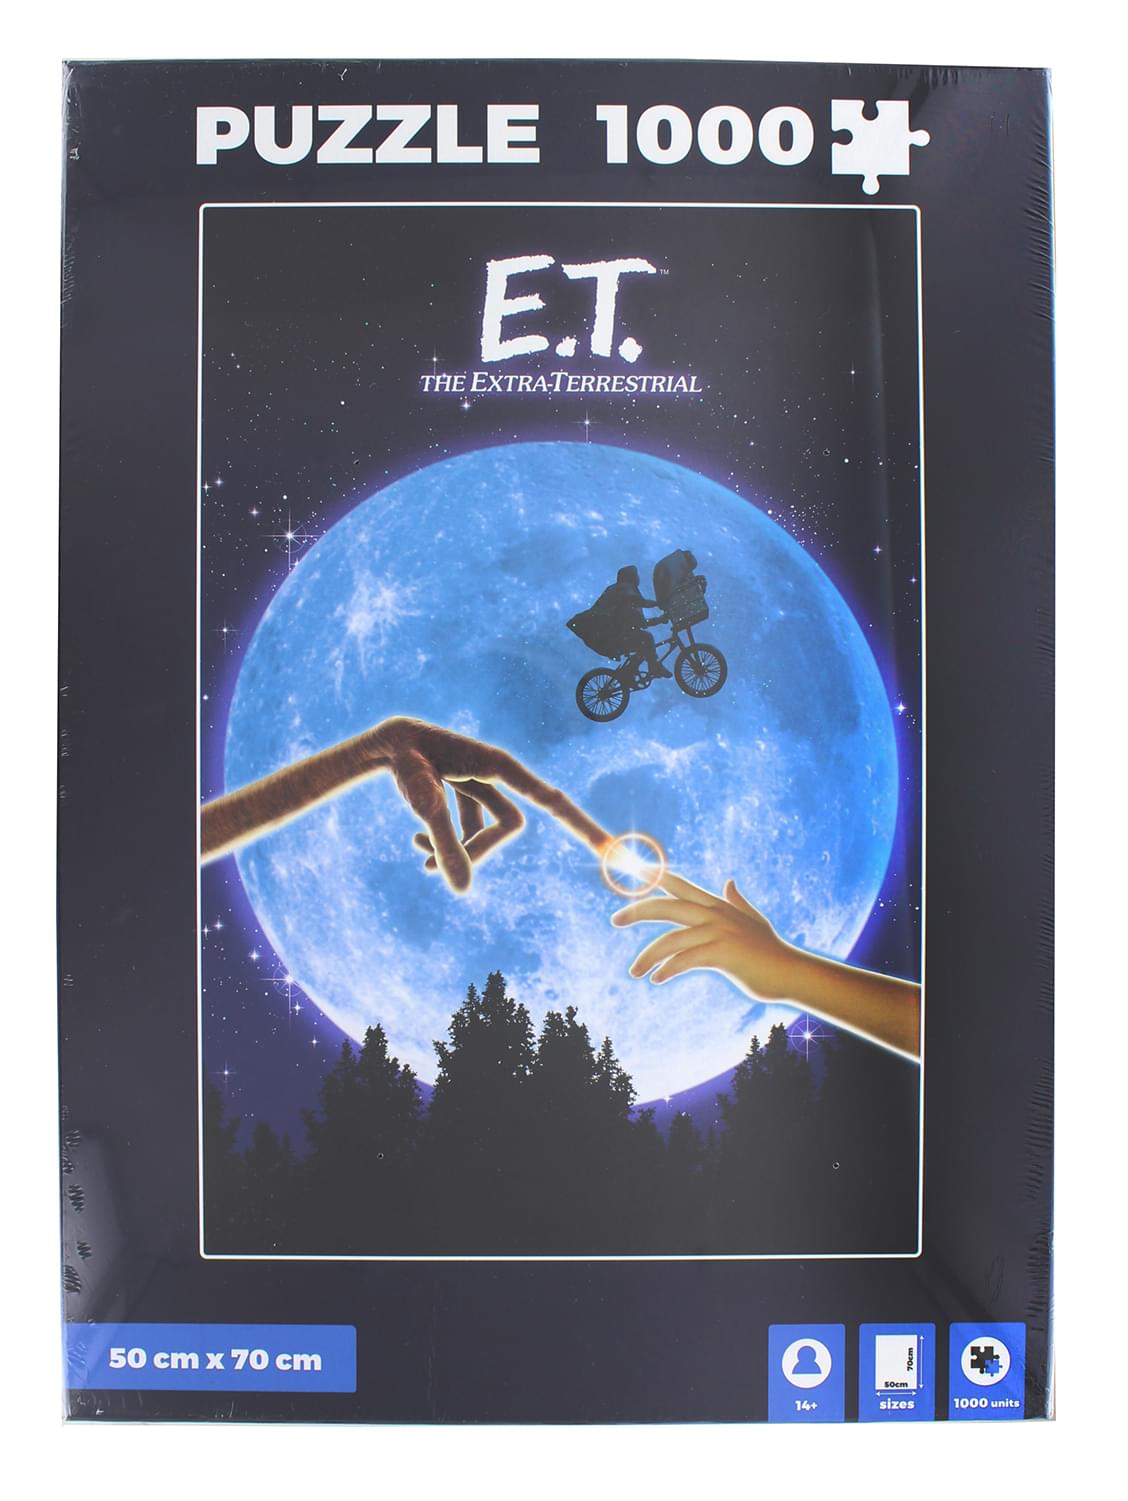 E.T. The Extra-Terrestrial Movie Poster 1000 Piece Jigsaw Puzzle